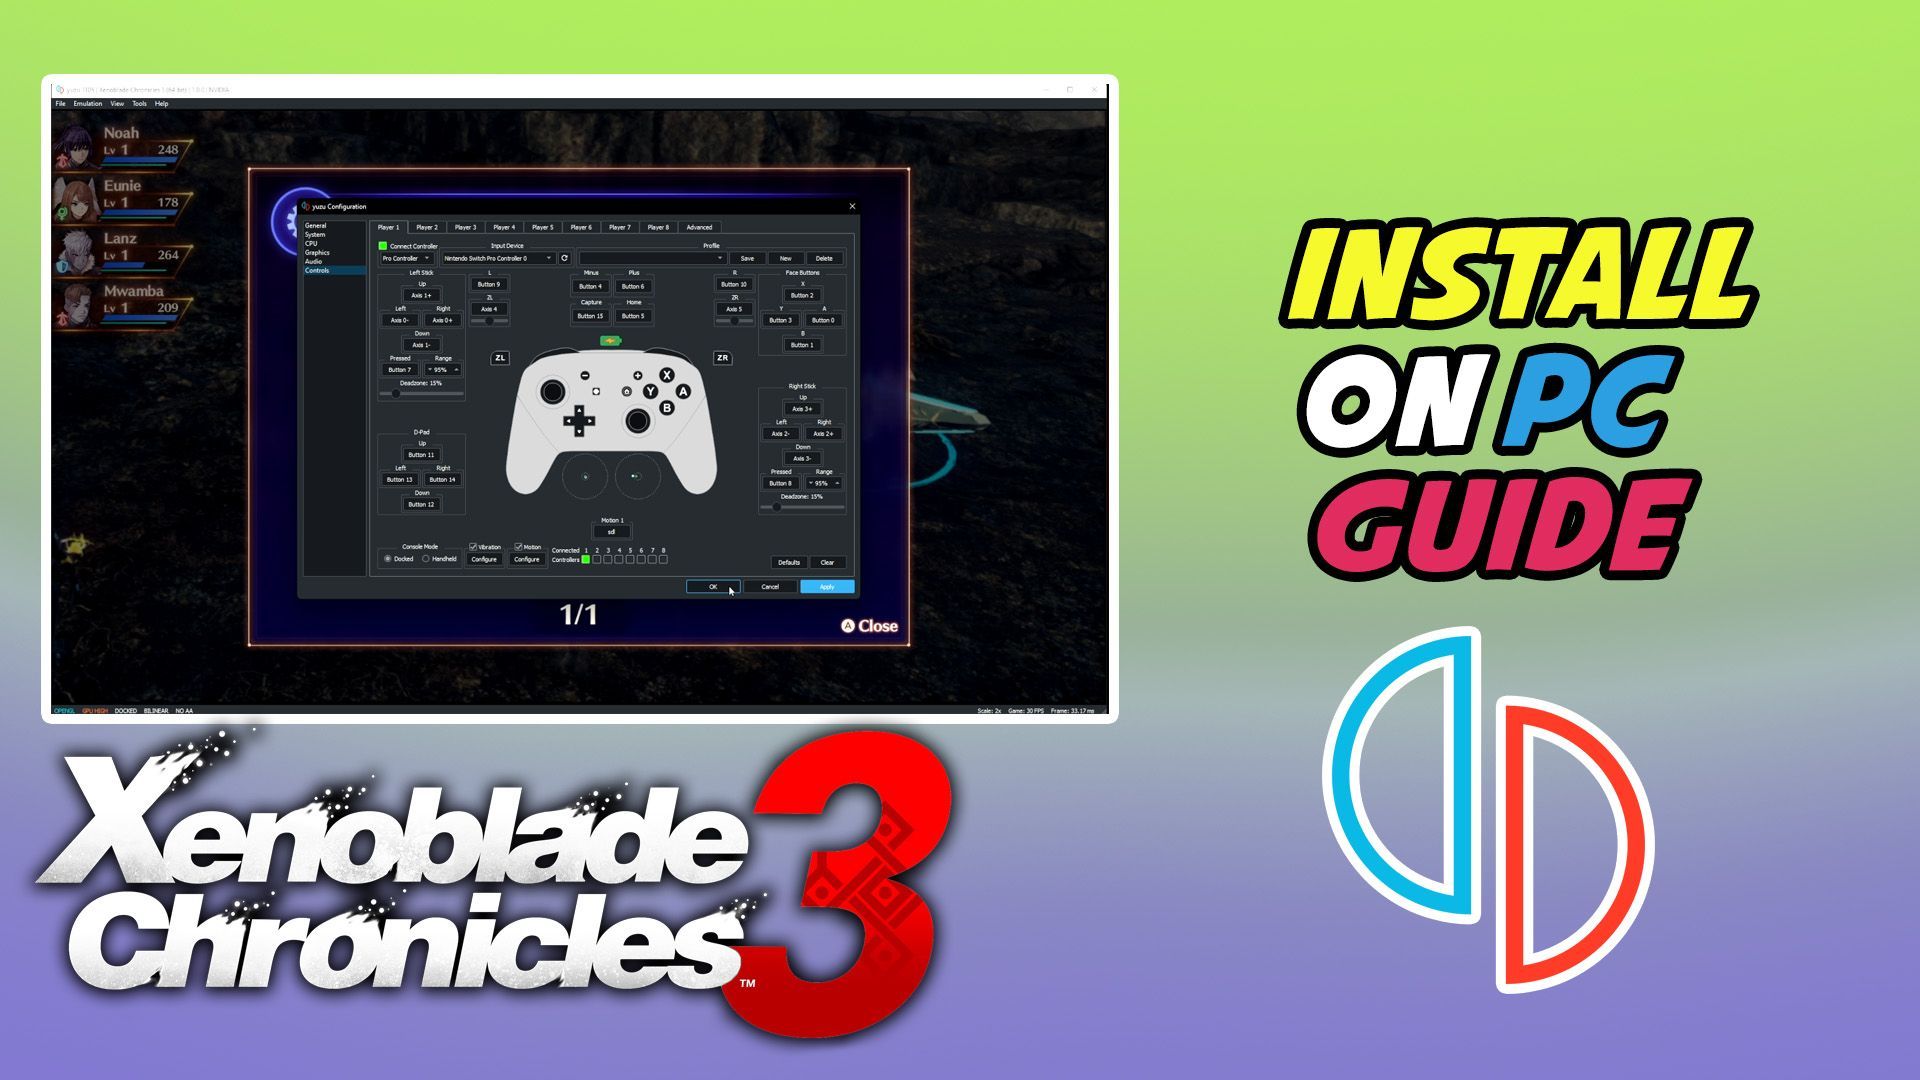 Play Xenoblade Chronicles 3 & Setup on PC  YUZU Switch Emulator [Updated  Guide] - video Dailymotion